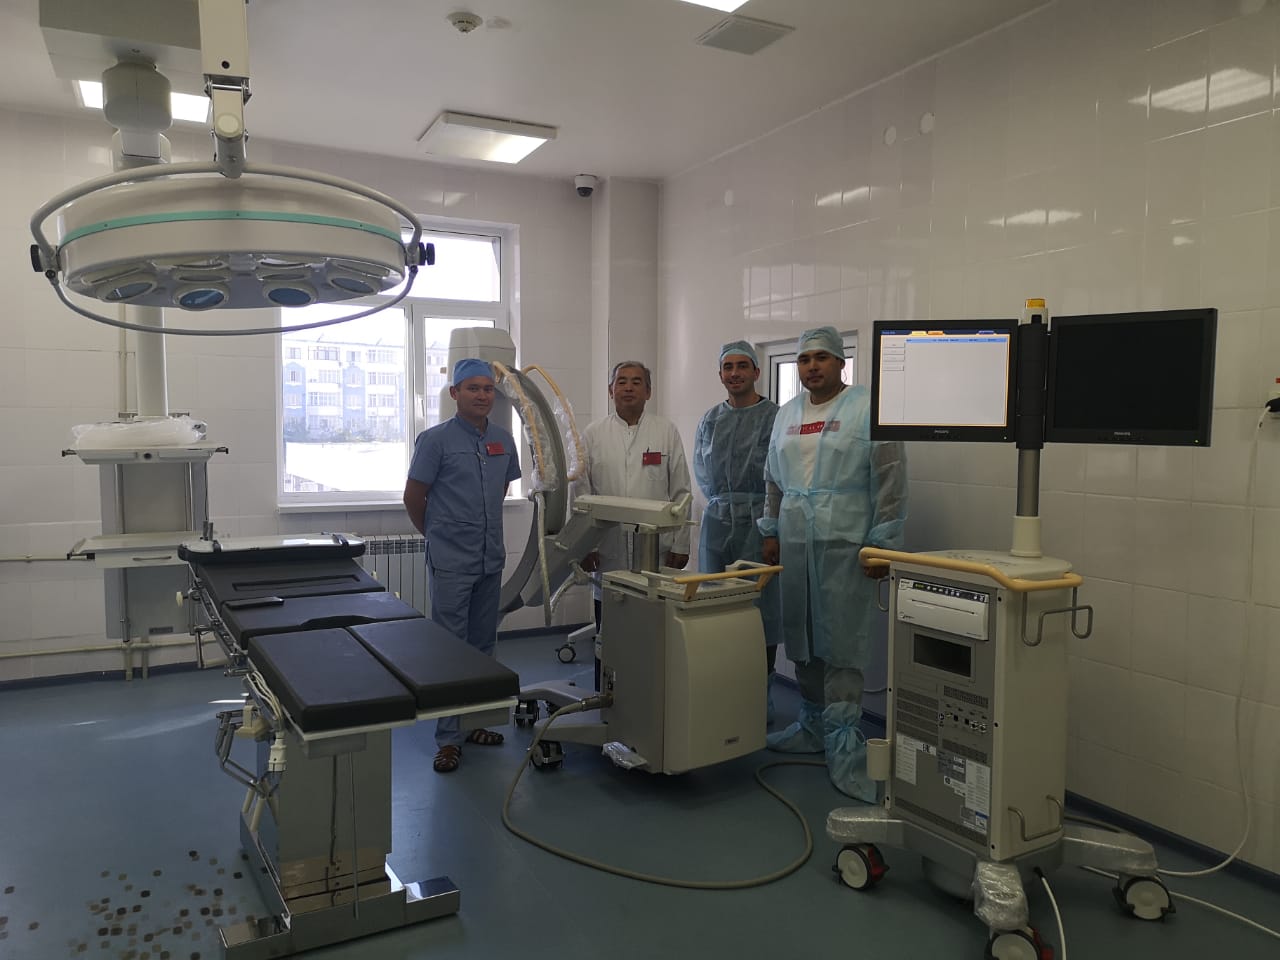 On September 20-21, 2019, Philips BV Mobile C-Arm was installed at the City Hospital No. 1 in Taraz